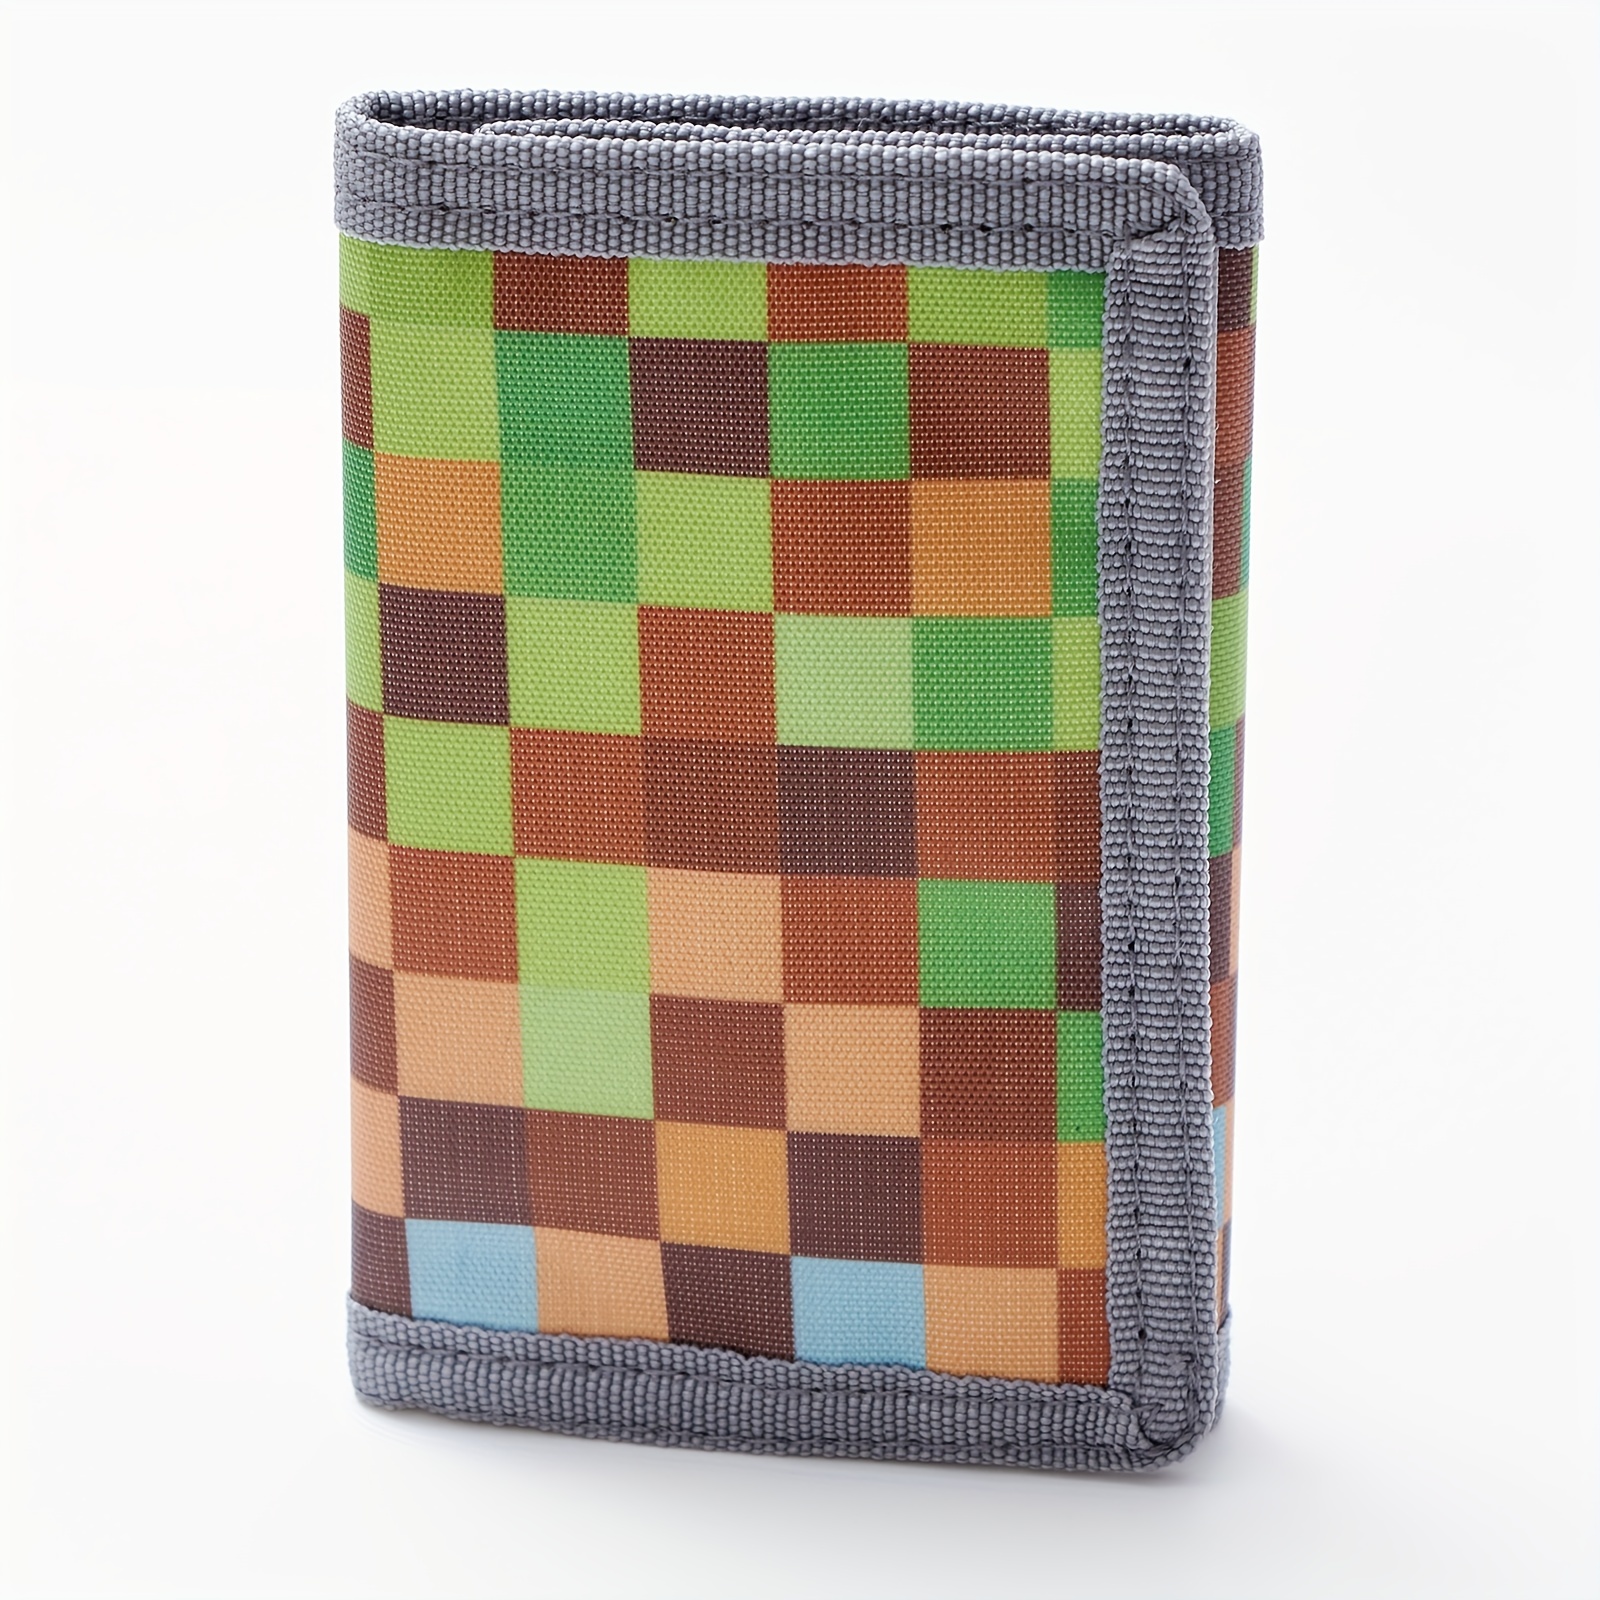 Kids Wallets With Zipper Coin Pocket, Boys Plaid Trifold Wallet